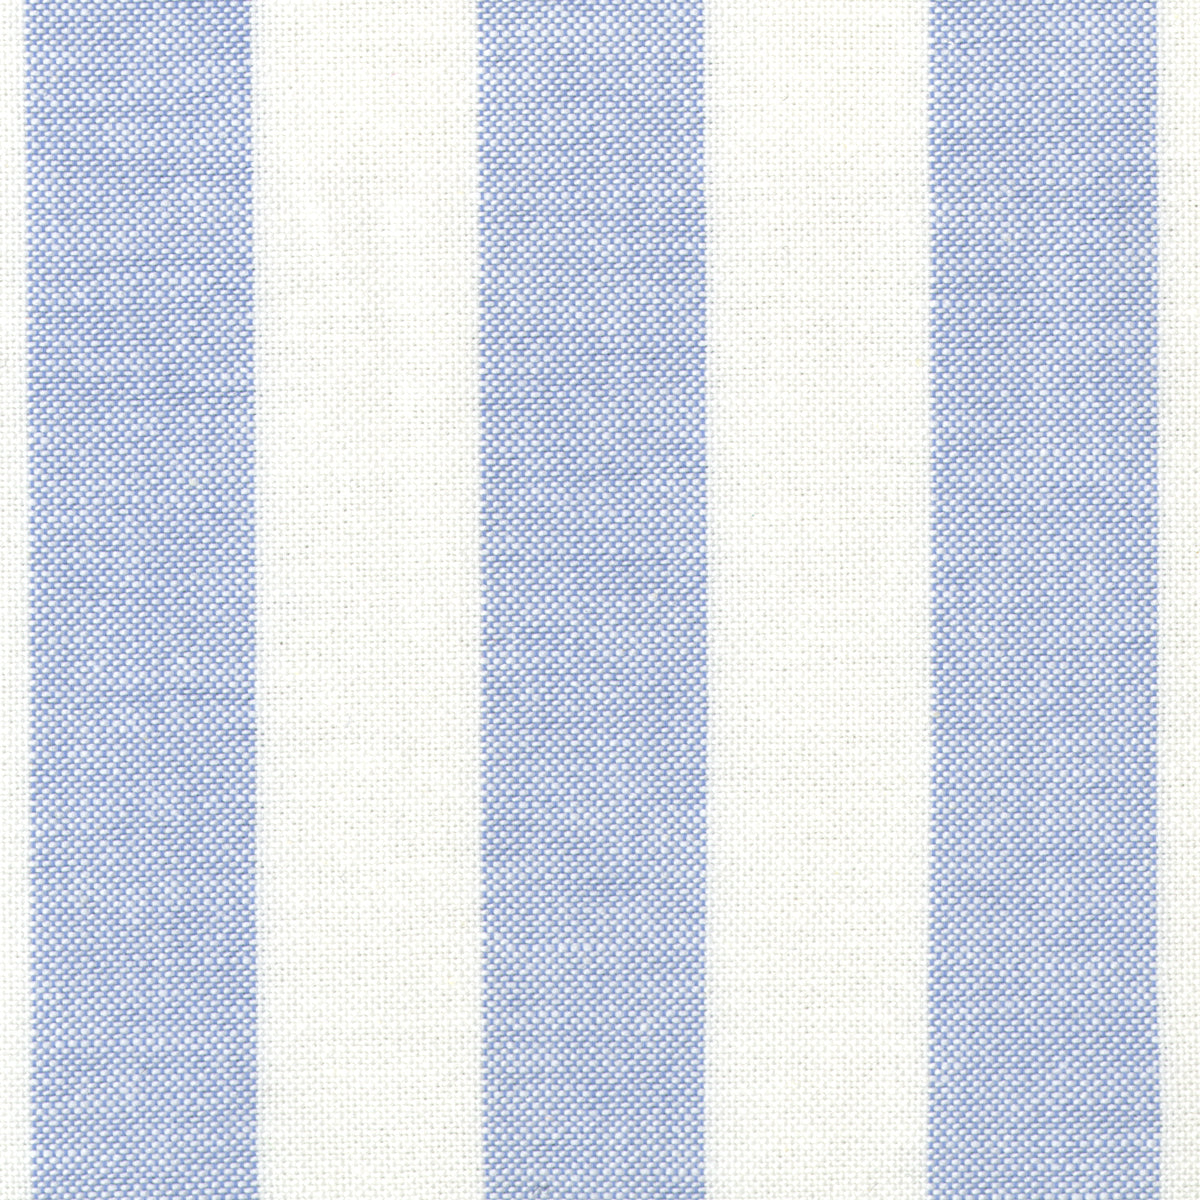 Made-to-Measure Shirt in Sky/White Cabana Stripe Oxford